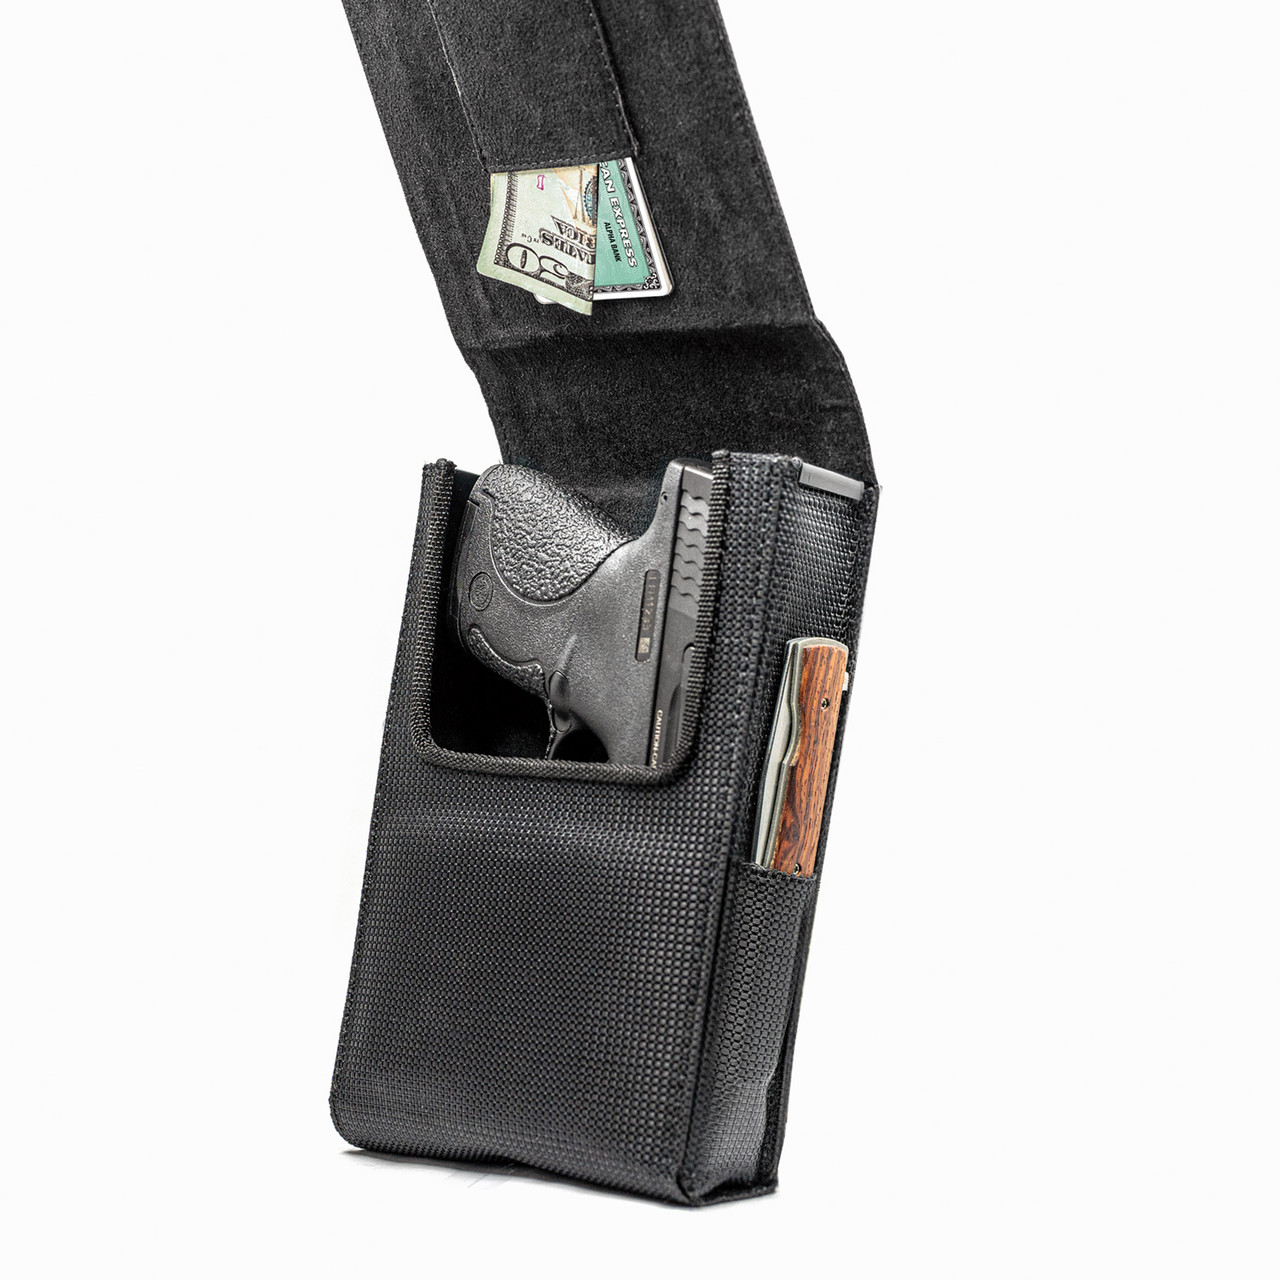 The Sig Sauer 1911 Ultra Compact Perfect Holster